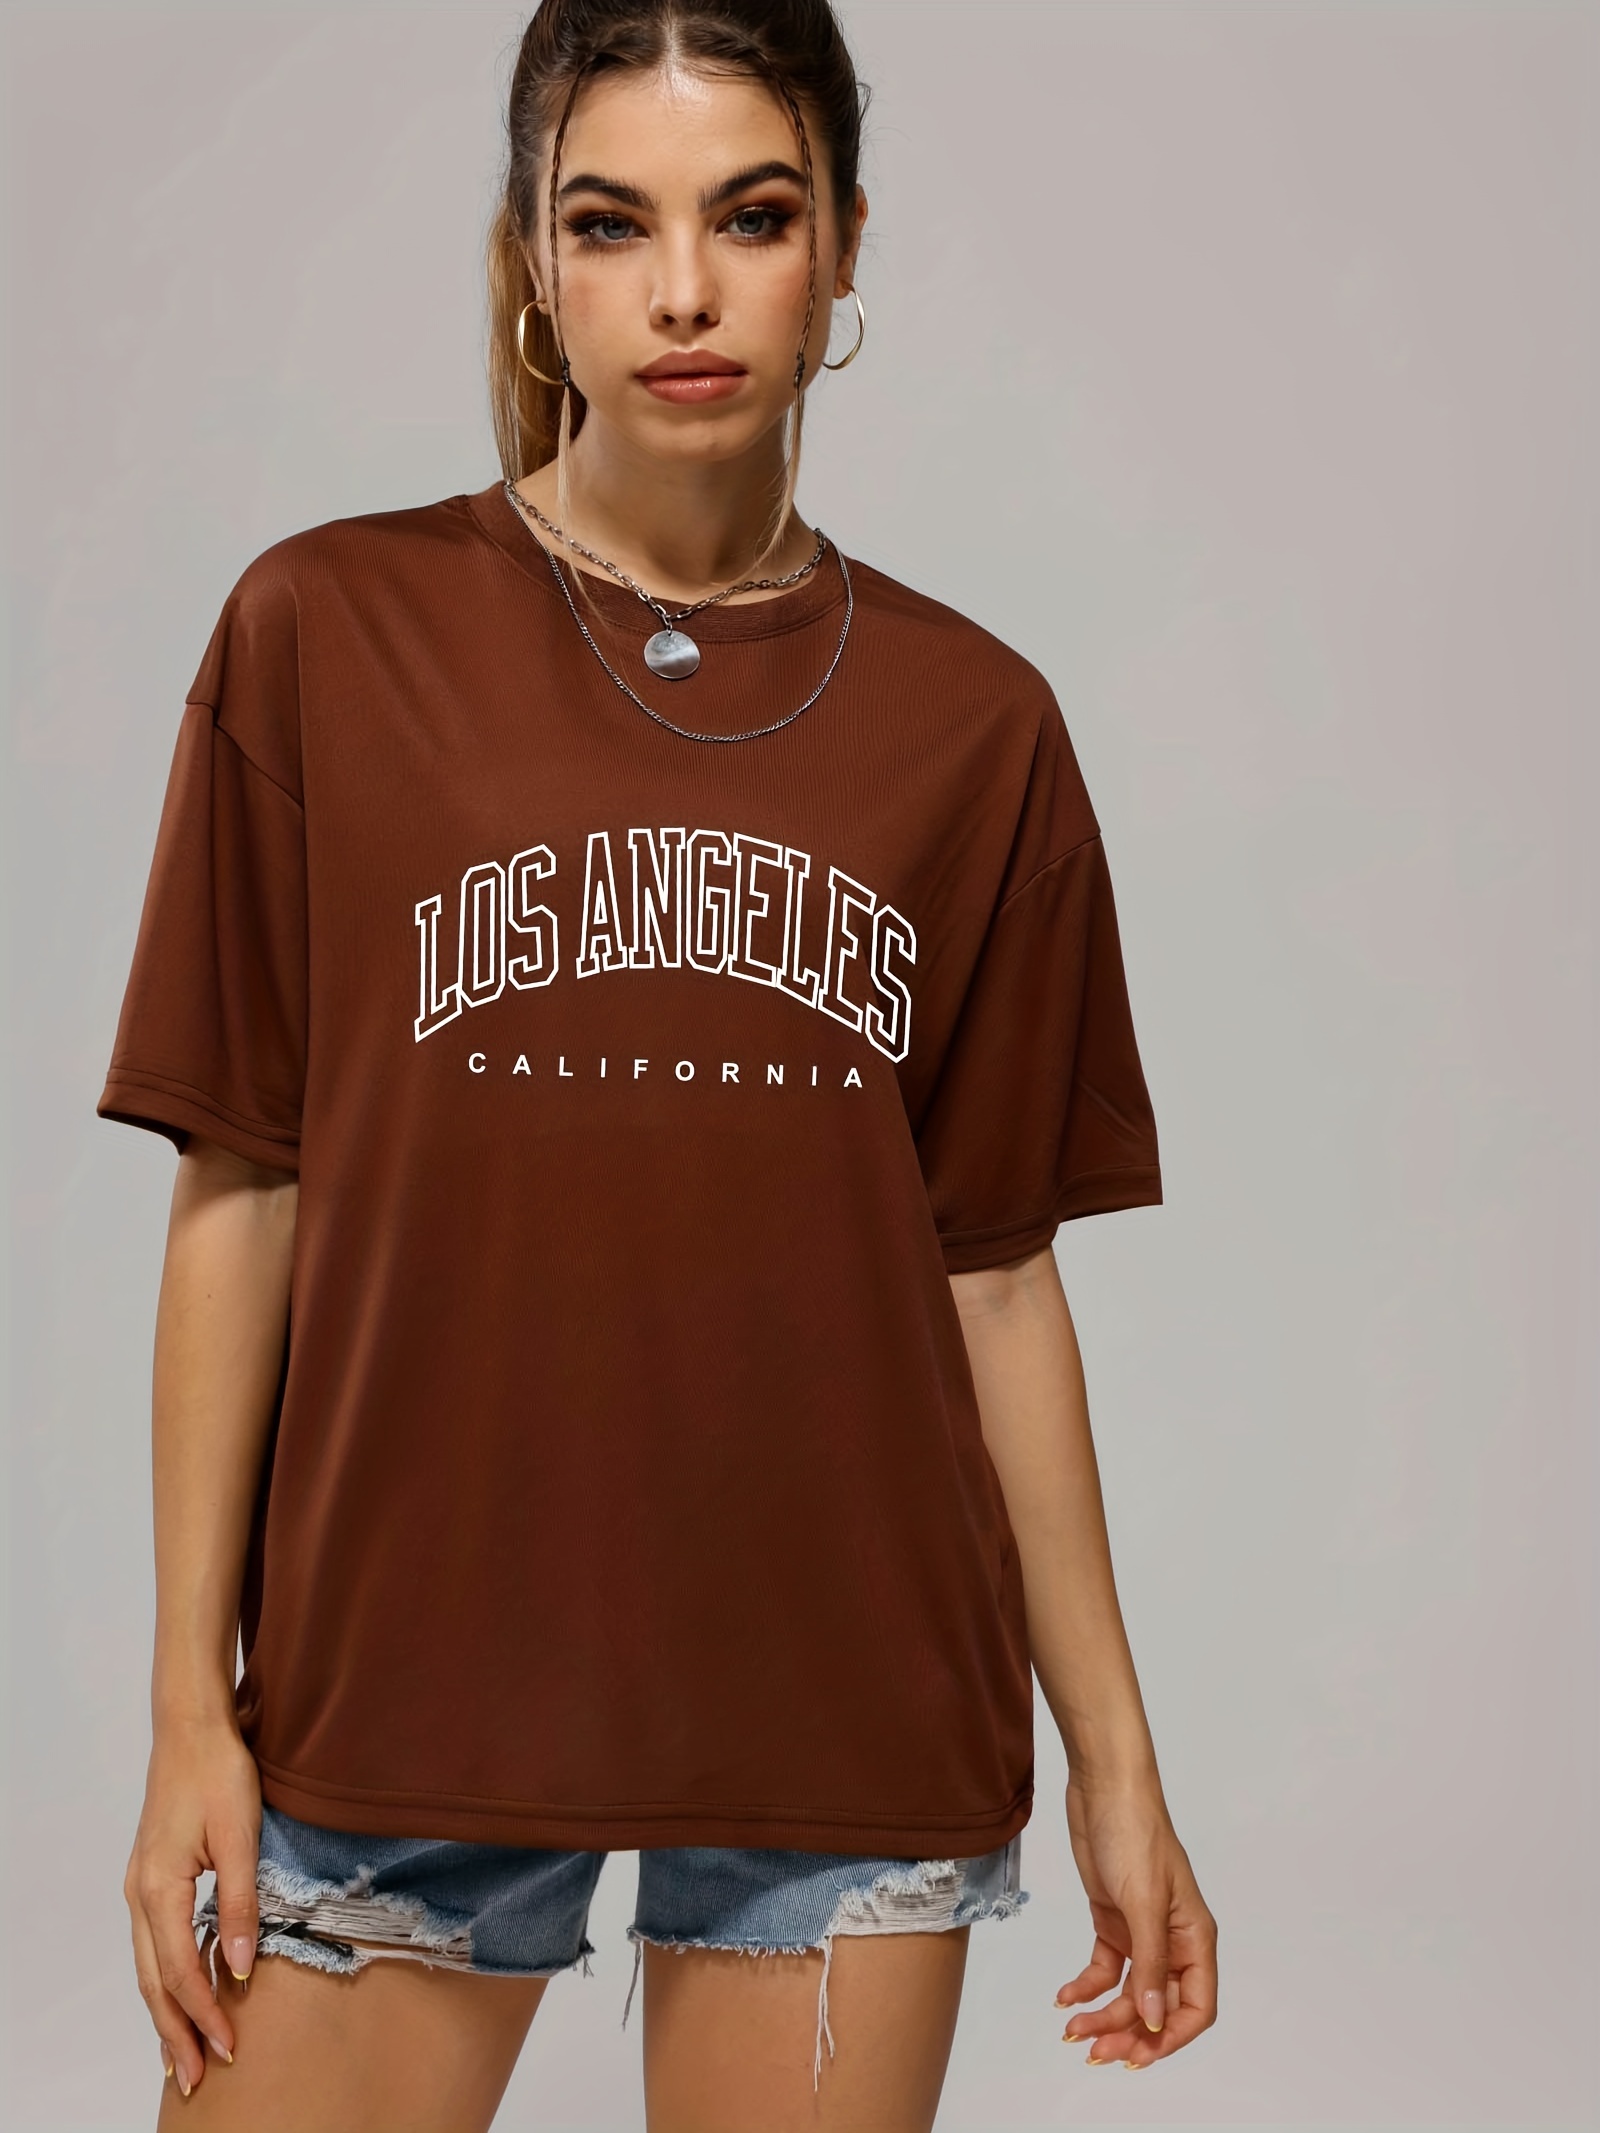 solid color letter print casual sports t shirt soft crew neck short sleeve tee womens clothing details 1